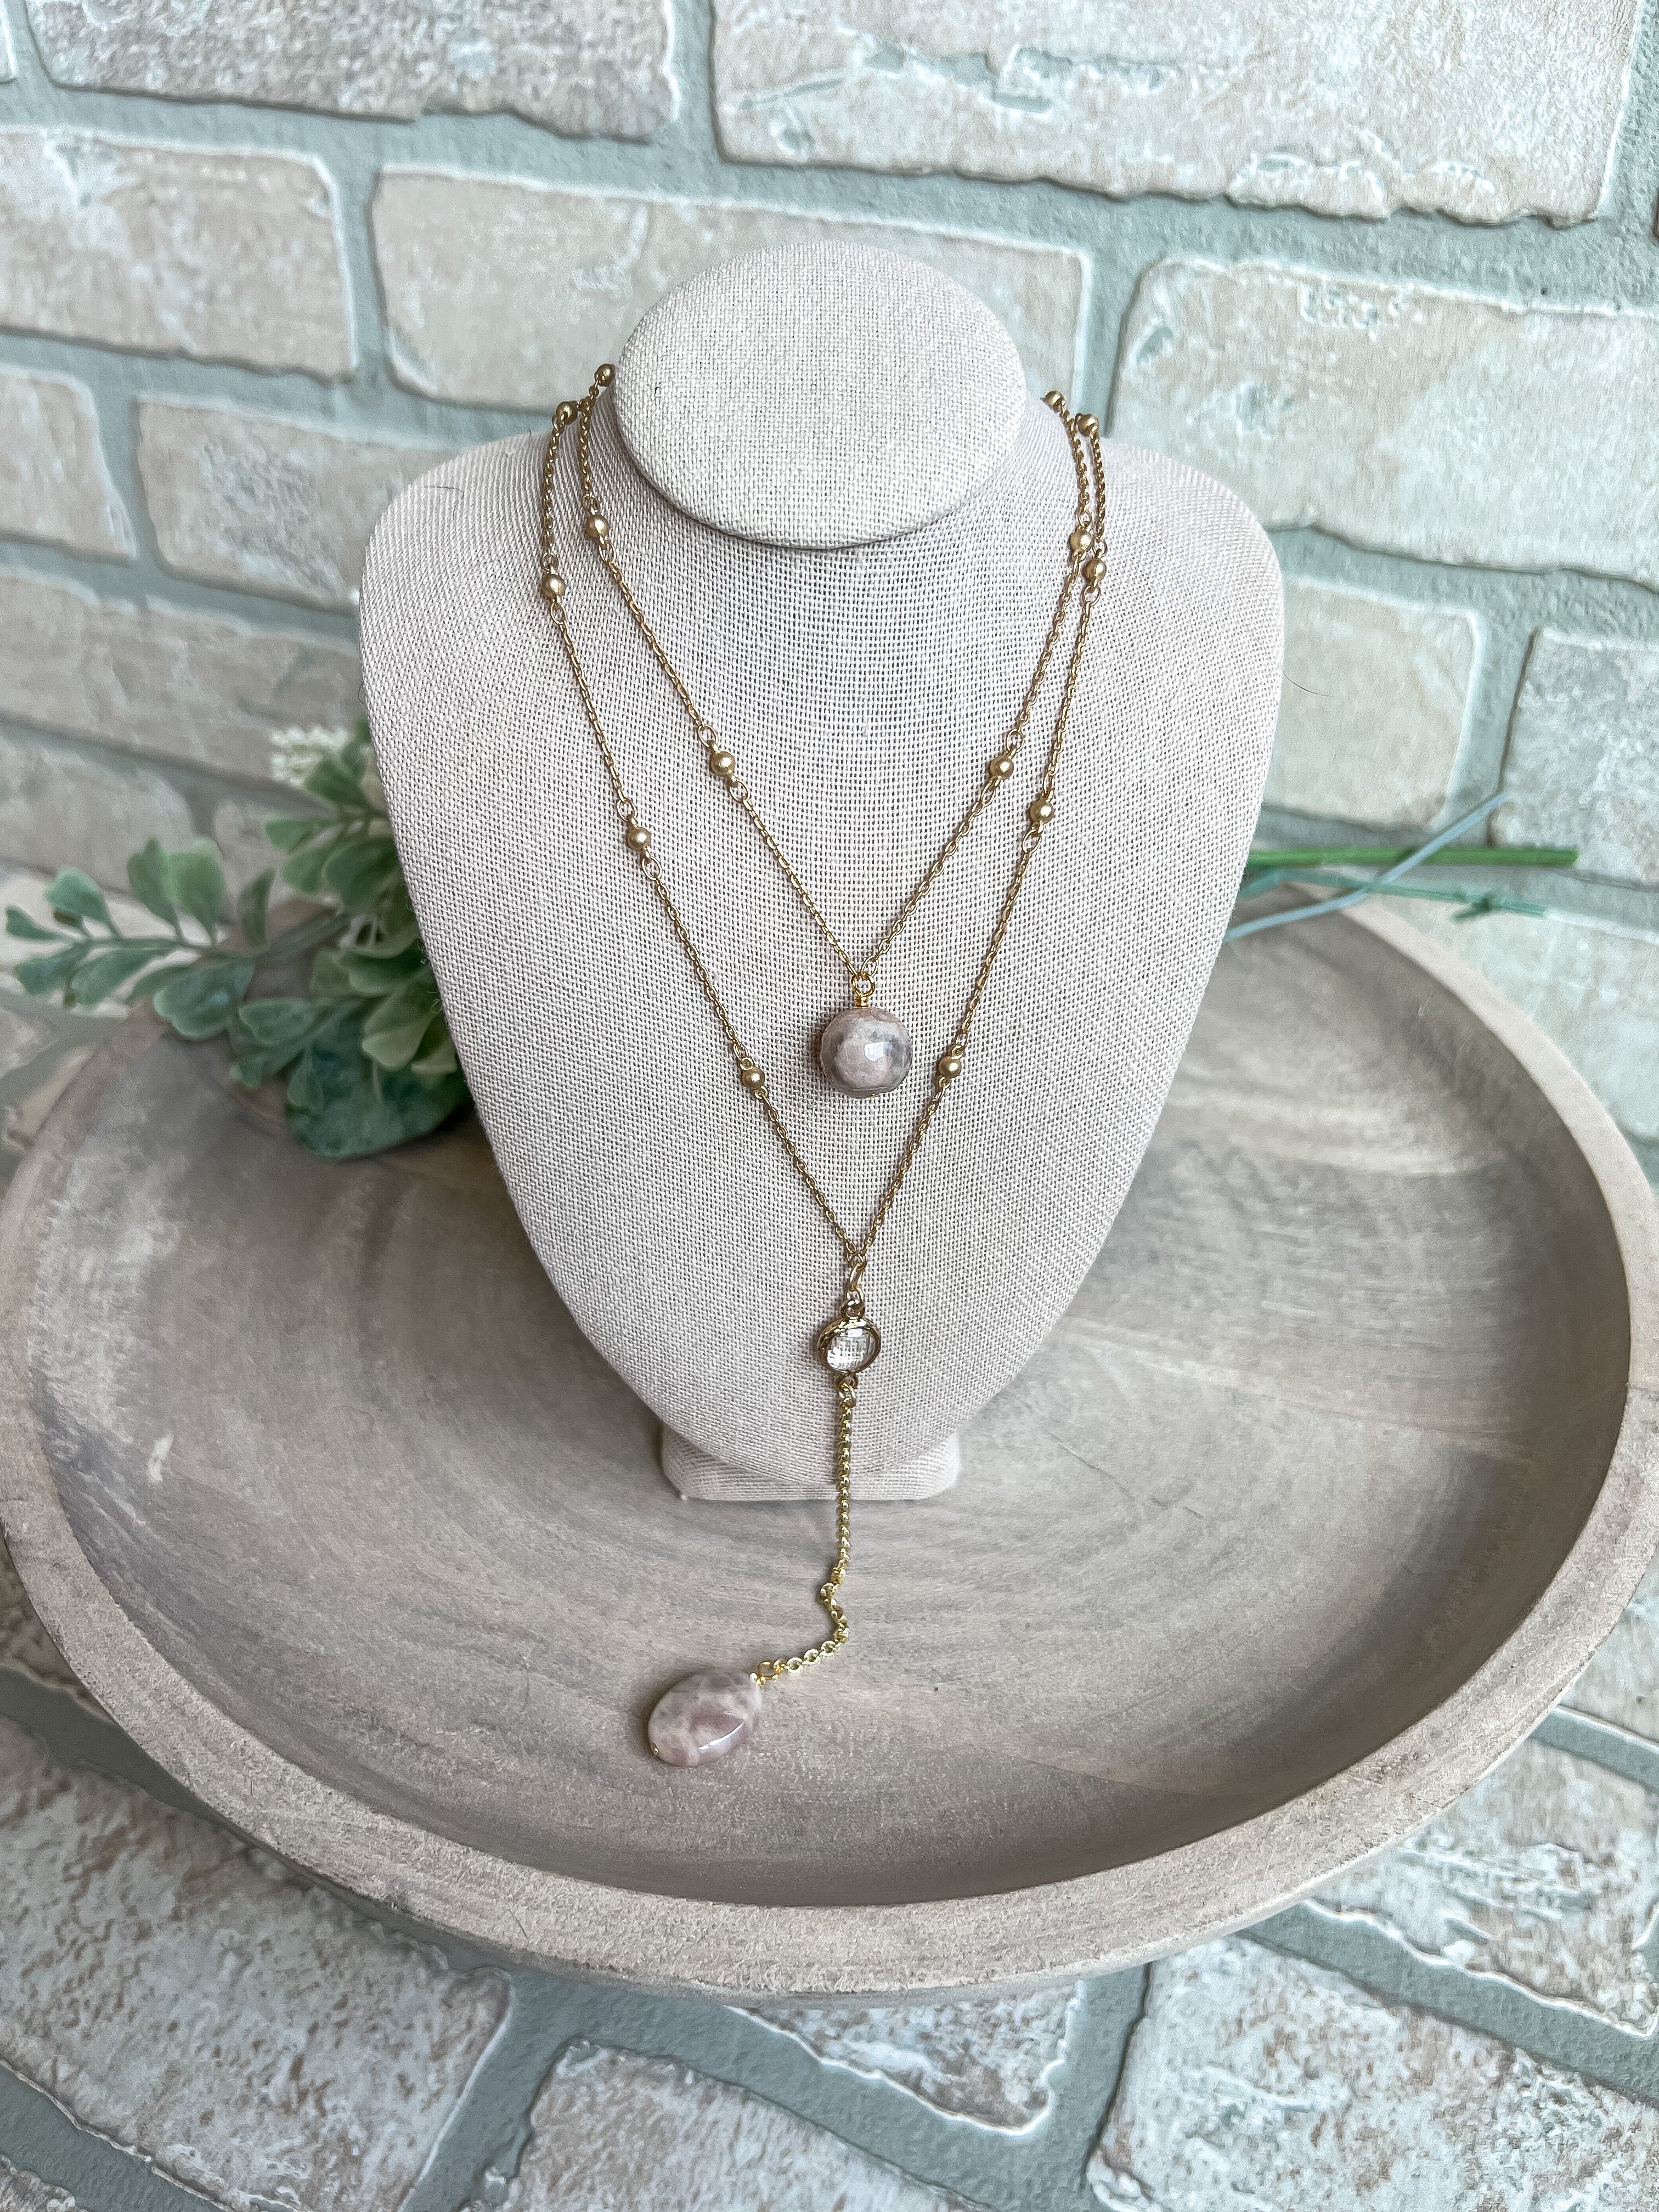 Tranquil Necklace- Peaches and Cream